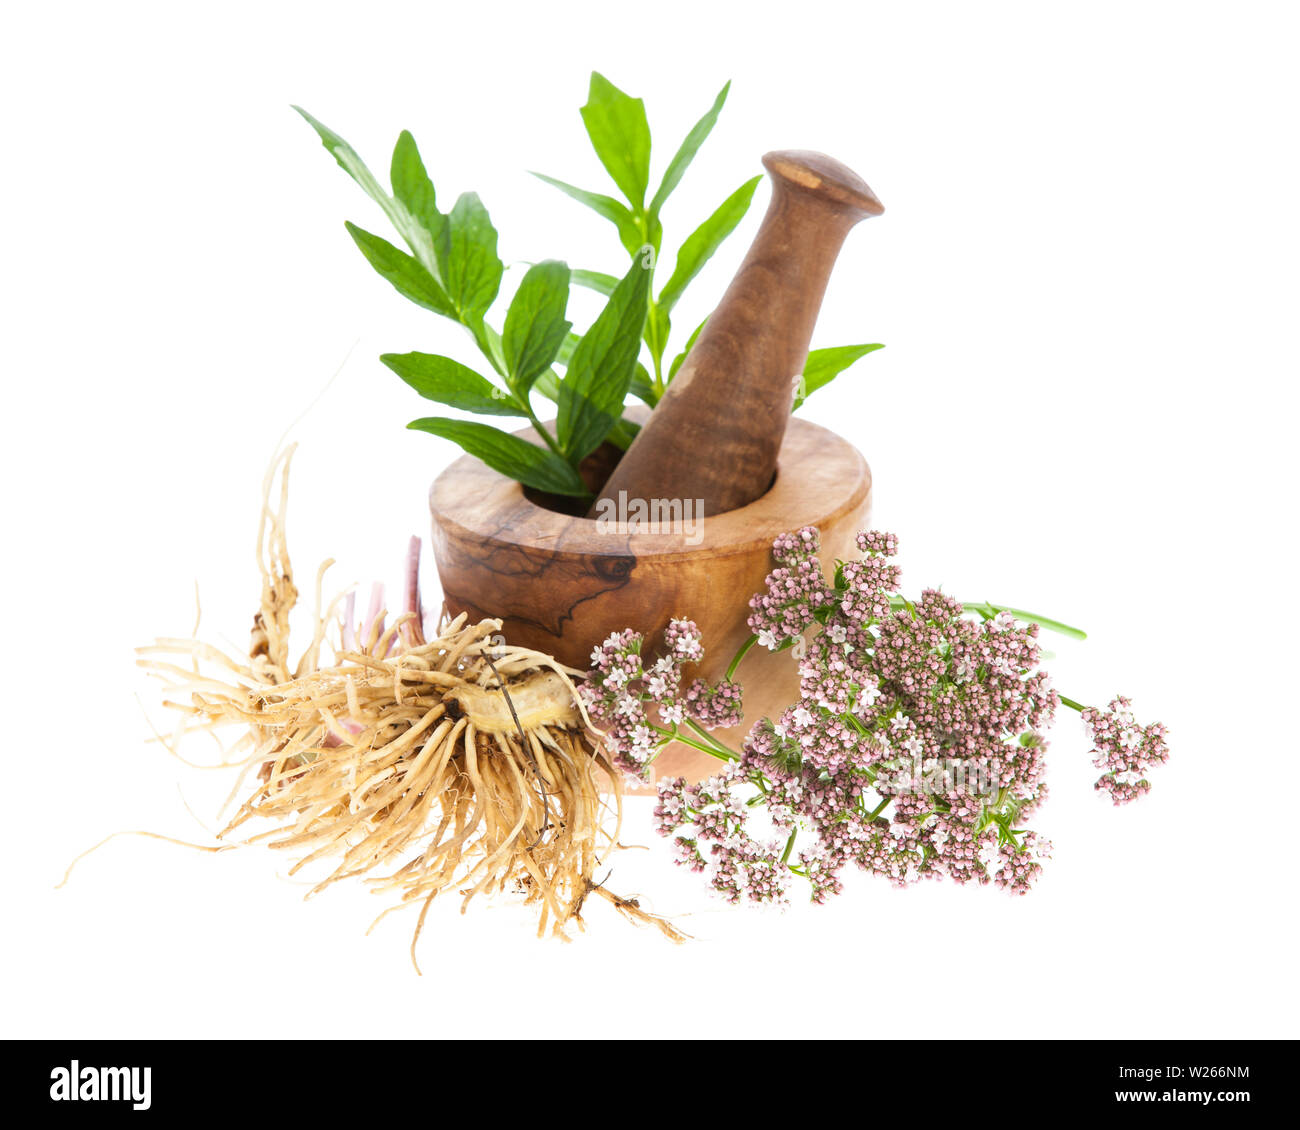 valerian (Valeriana officinalis) - rhizome, blossoms and leafs with mortar on white background Stock Photo